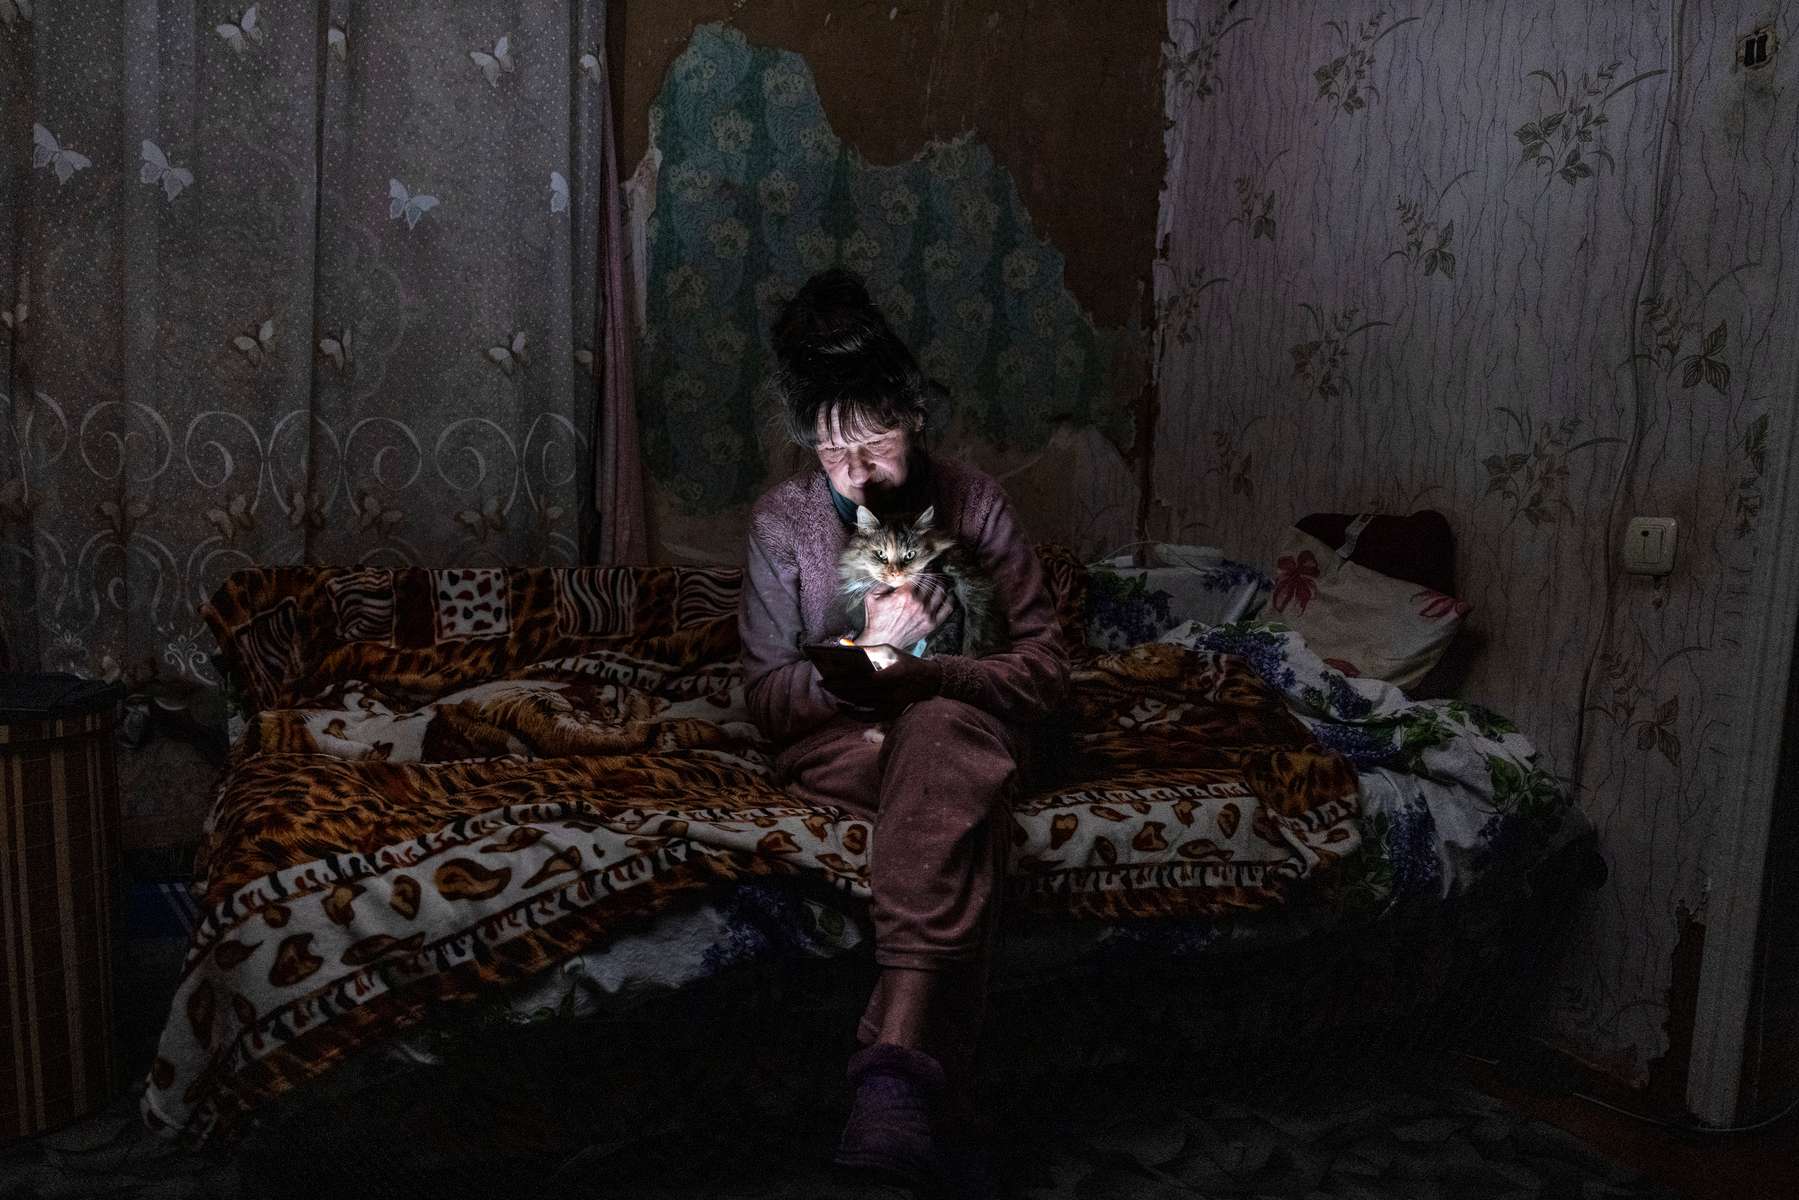 BORODYANKA, UKRAINE - Tetyana Safonova, 61, sits with her cat Asya as she looks at her mobile phone during a power outage on October 20, 2022 in Borodyanka, Ukraine. Tetyana wasn’t able to buy candles in town because of the sudden demand given the unpredictable power cuts that the government has imposed around Ukraine. Restricted power supplies and limited electricity started today so that energy companies could repair power facilities hit by a wave of recent Russian air strikes. (Photo by Paula Bronstein /Getty Images)